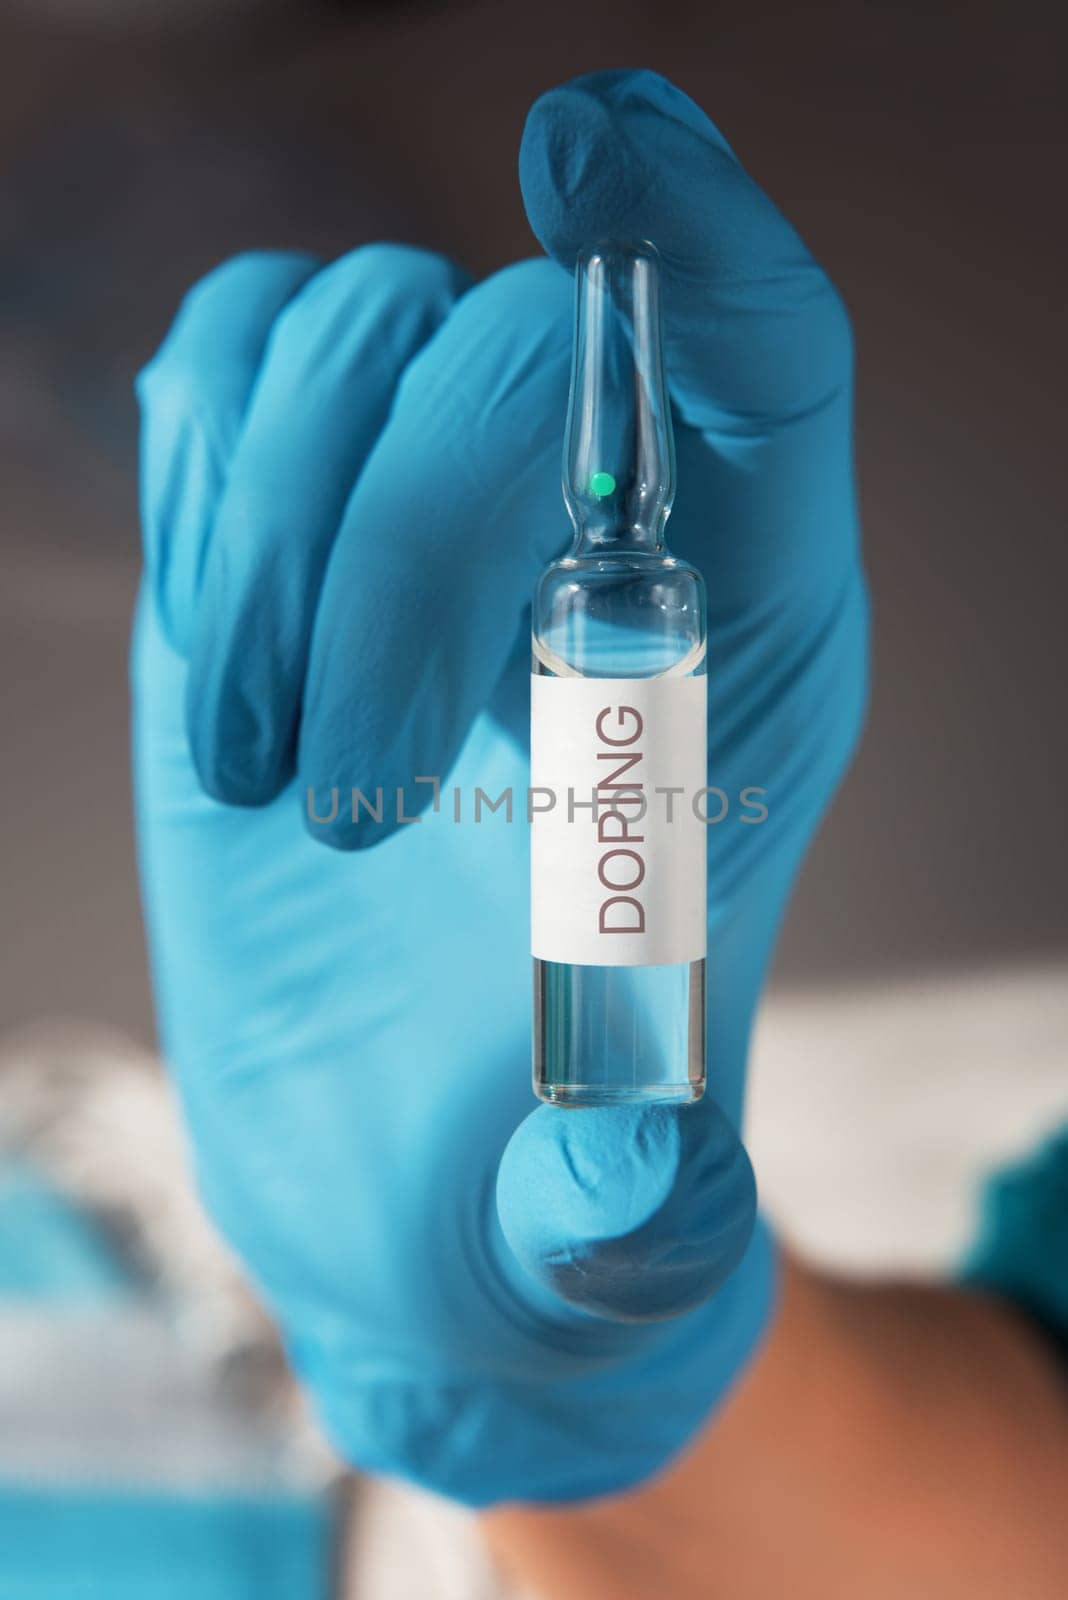 A doping ampoule in a nurse's hand closeup photo, sports doping addiction concept